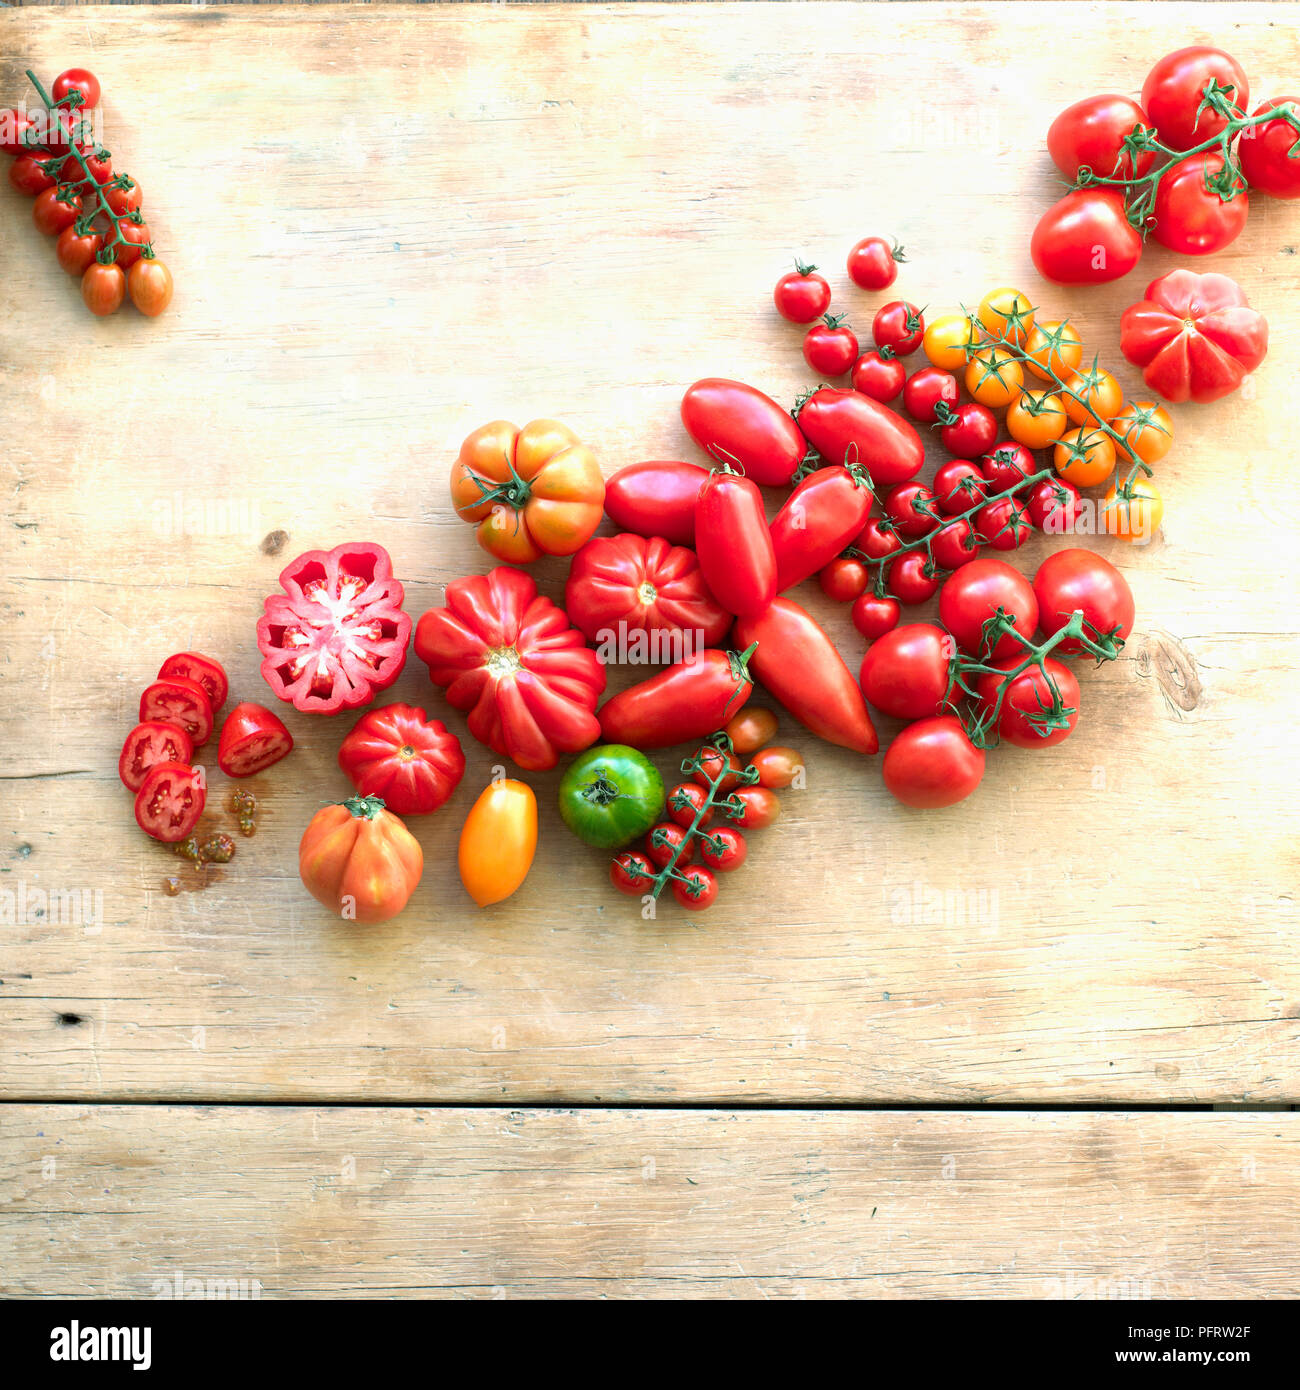 A selection of tomatoes of different shapes, sizes, and colours on wood background Stock Photo